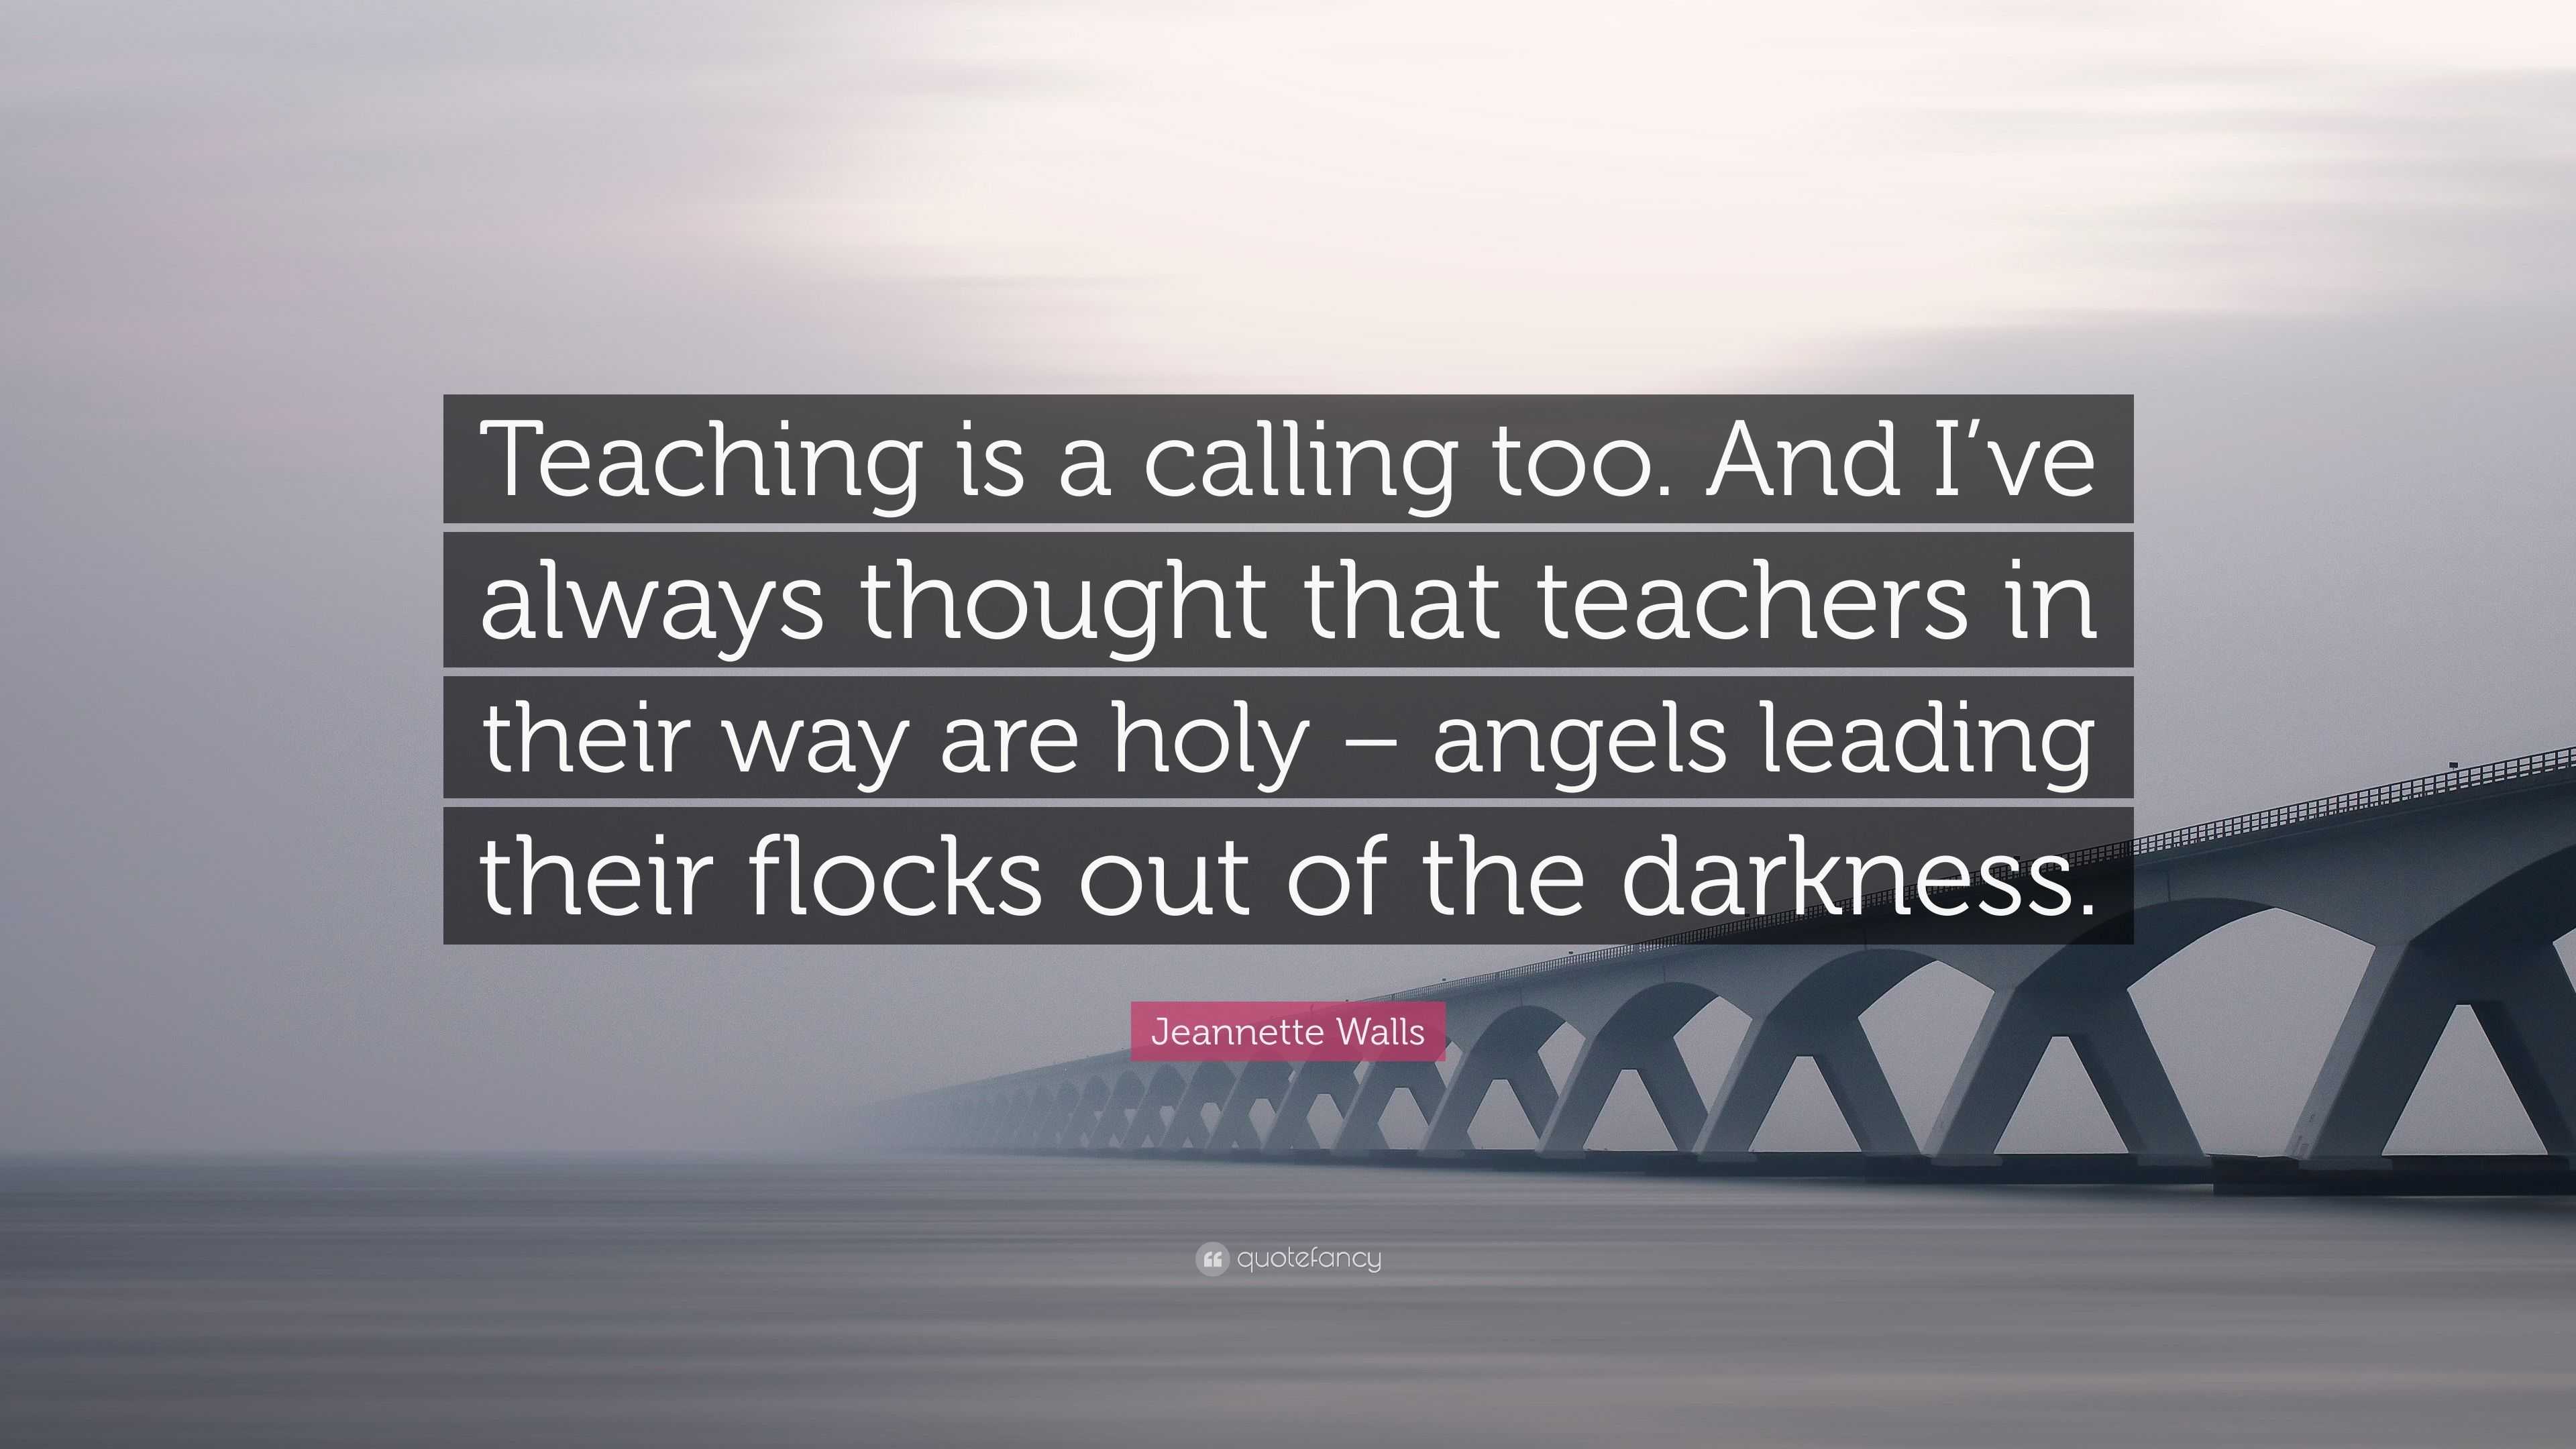 4760618 Jeannette Walls Quote Teaching is a calling too And I ve always